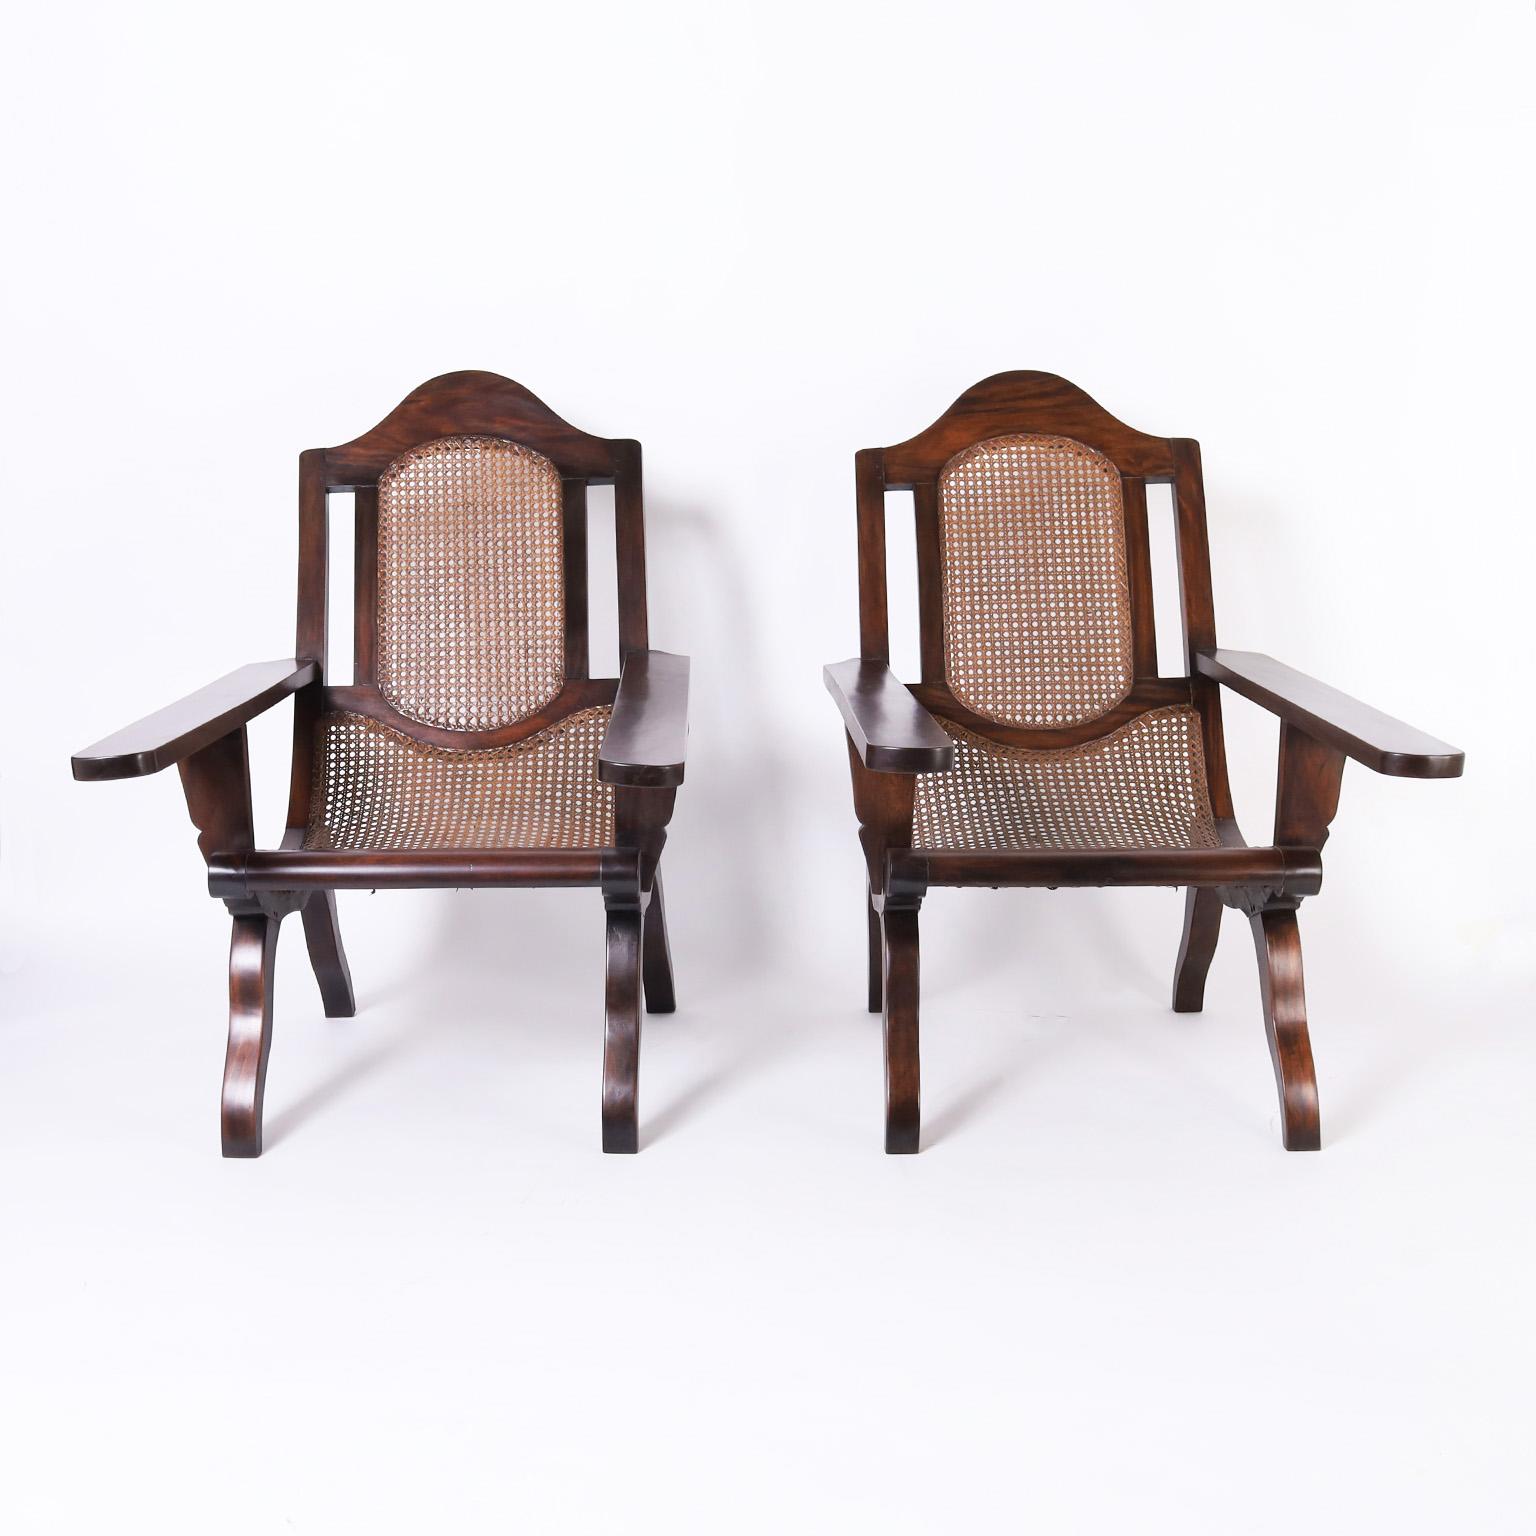 Standout pair of antique British colonial planters chairs crafted with mahogany in an unusual elegant form having inclined caned seats, caned backs, and leg rests.